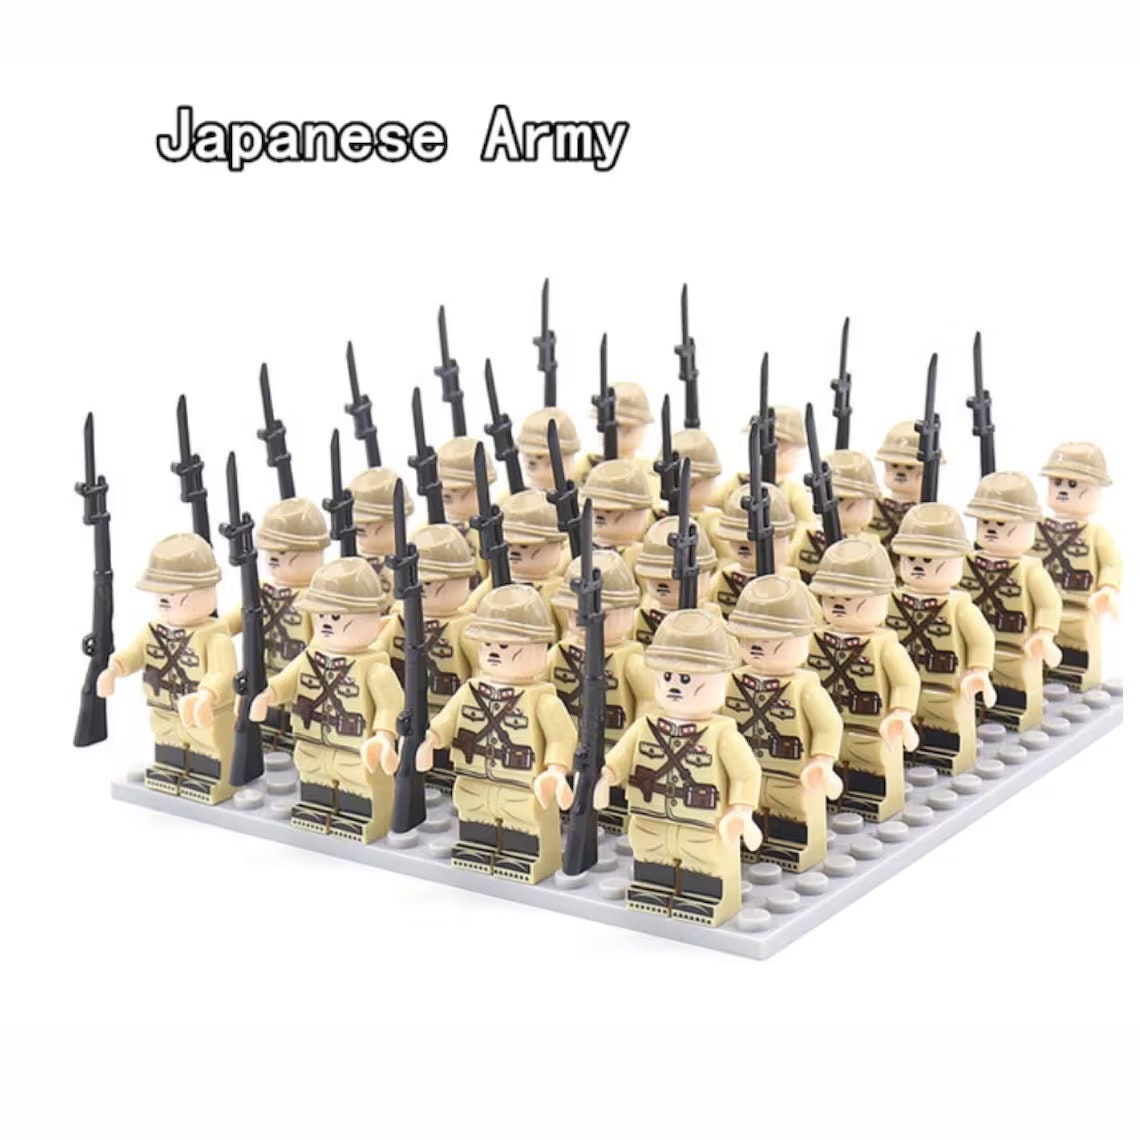 Japanese WW2 Military Soldier Army Building Figures 24pcs set image 1